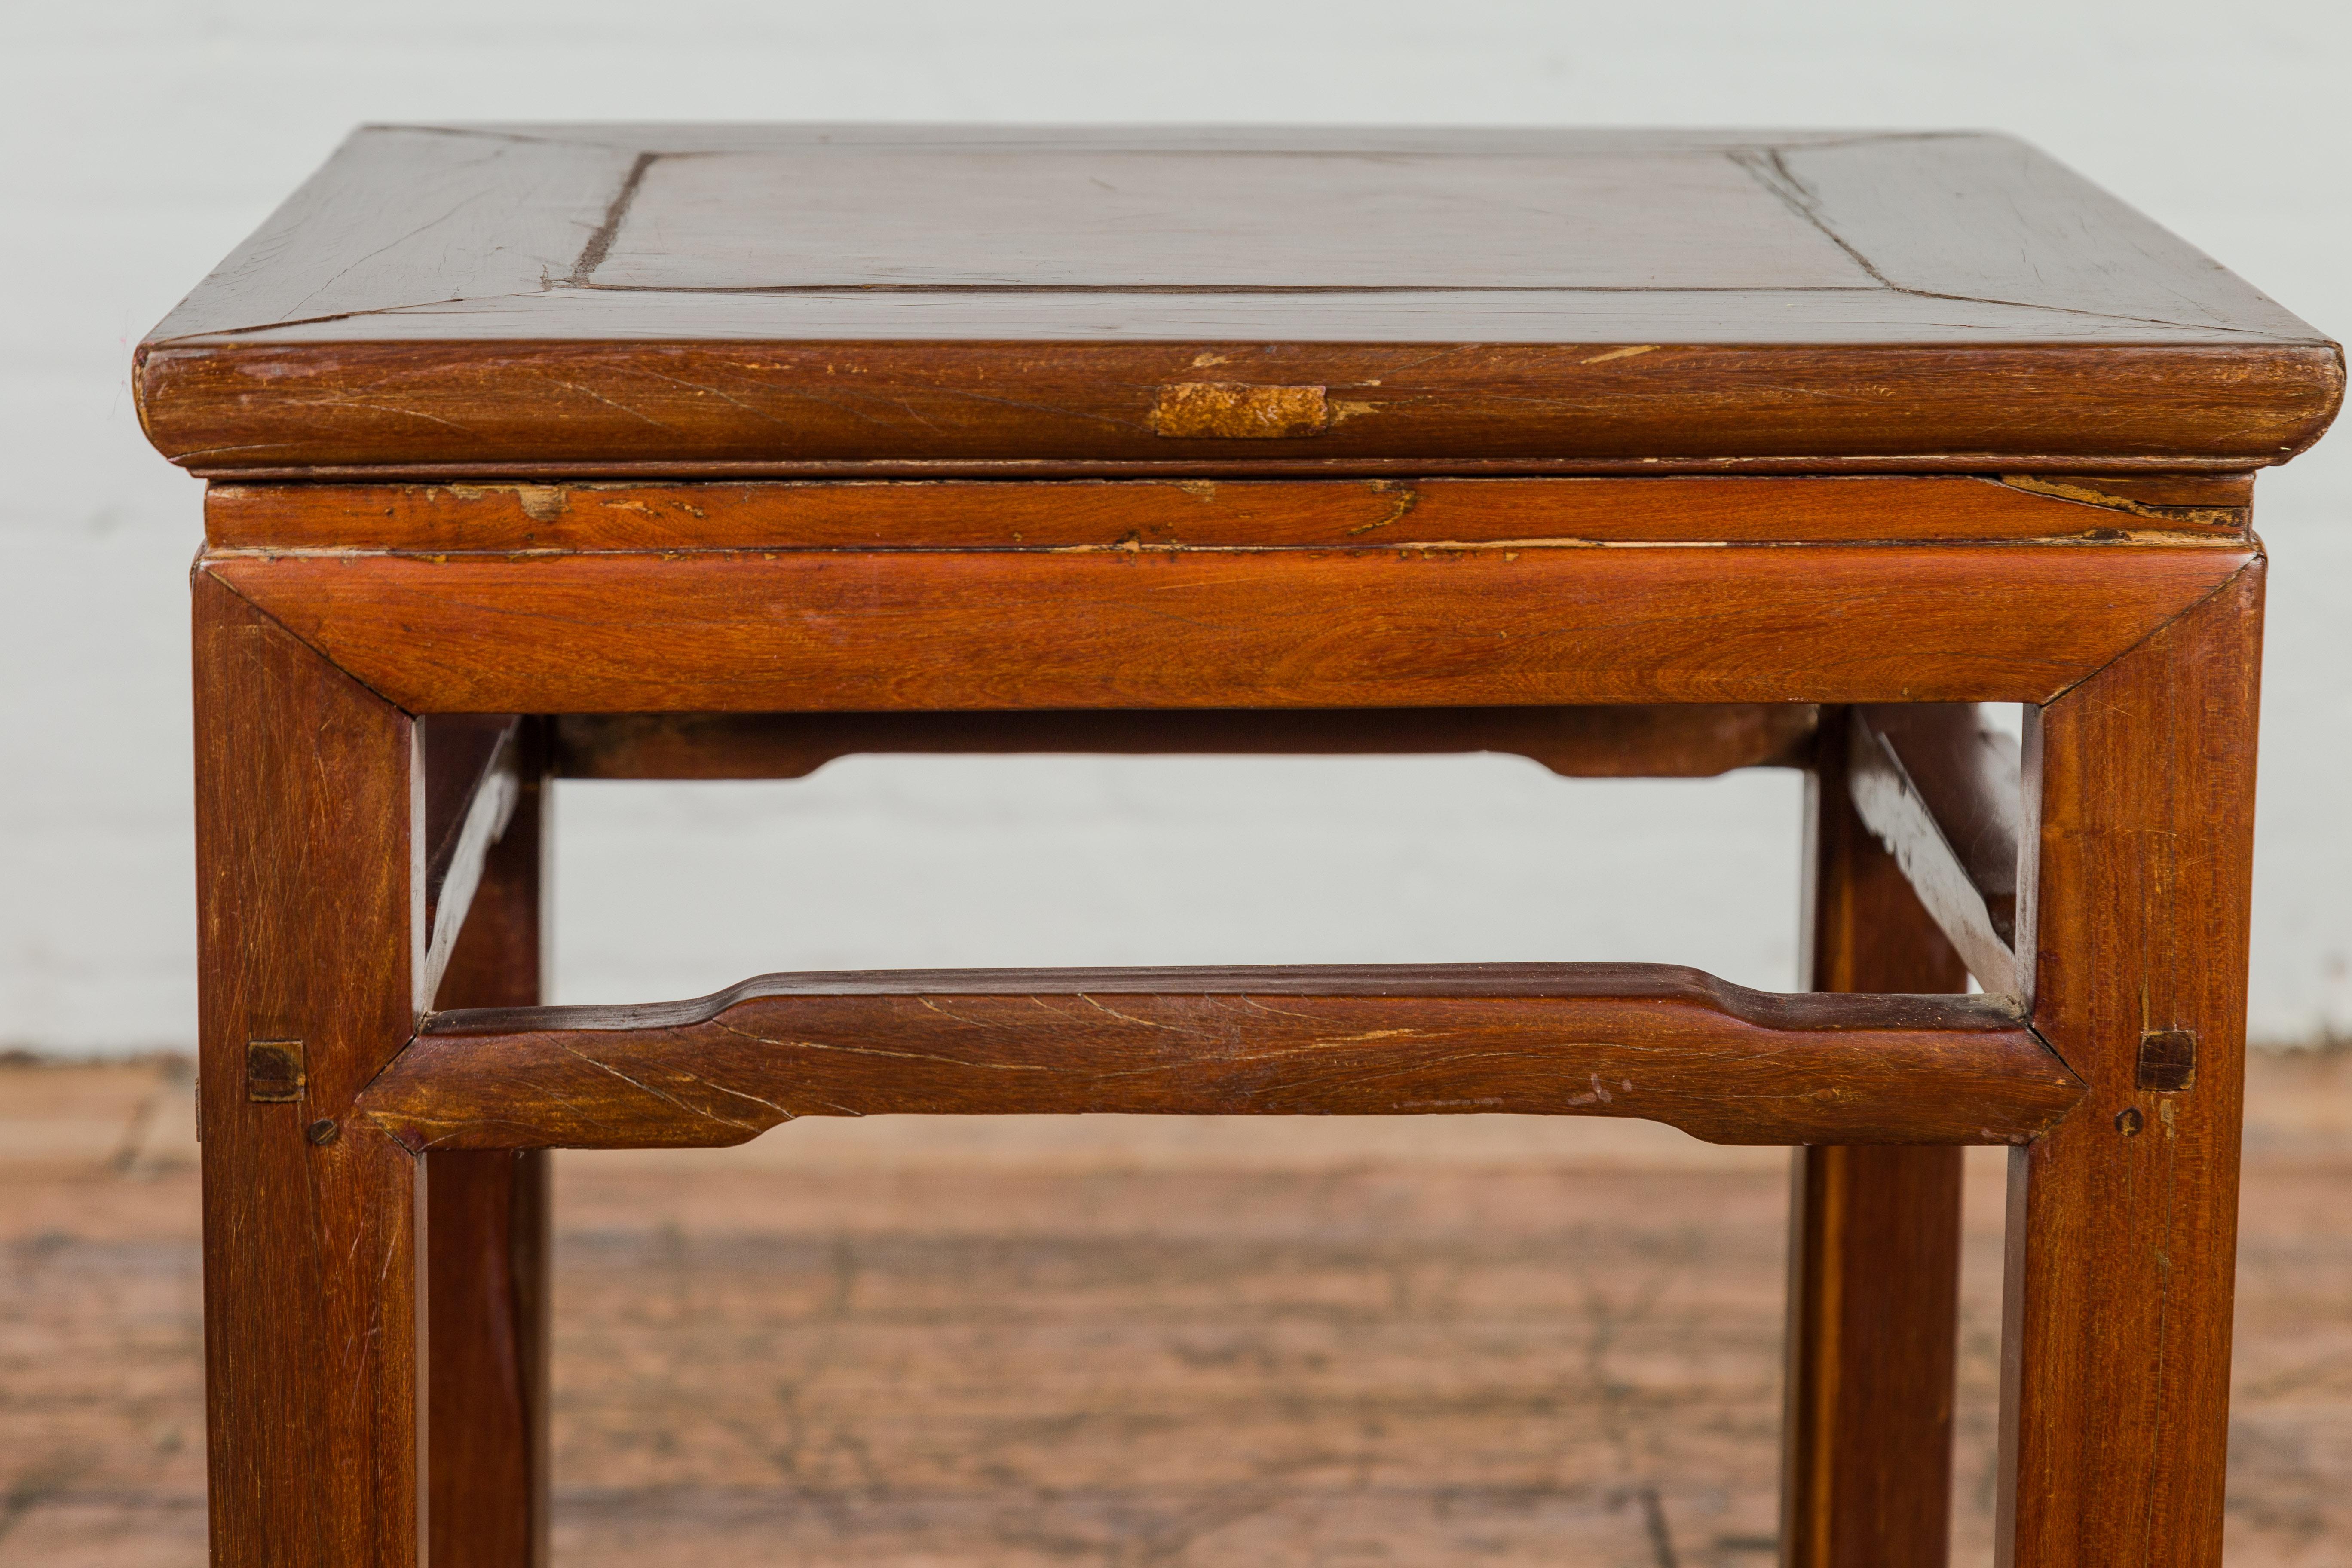 Wood Qing Dynasty Side Table with Burl Top, Horse Hoof Legs and Humpback Stretcher For Sale